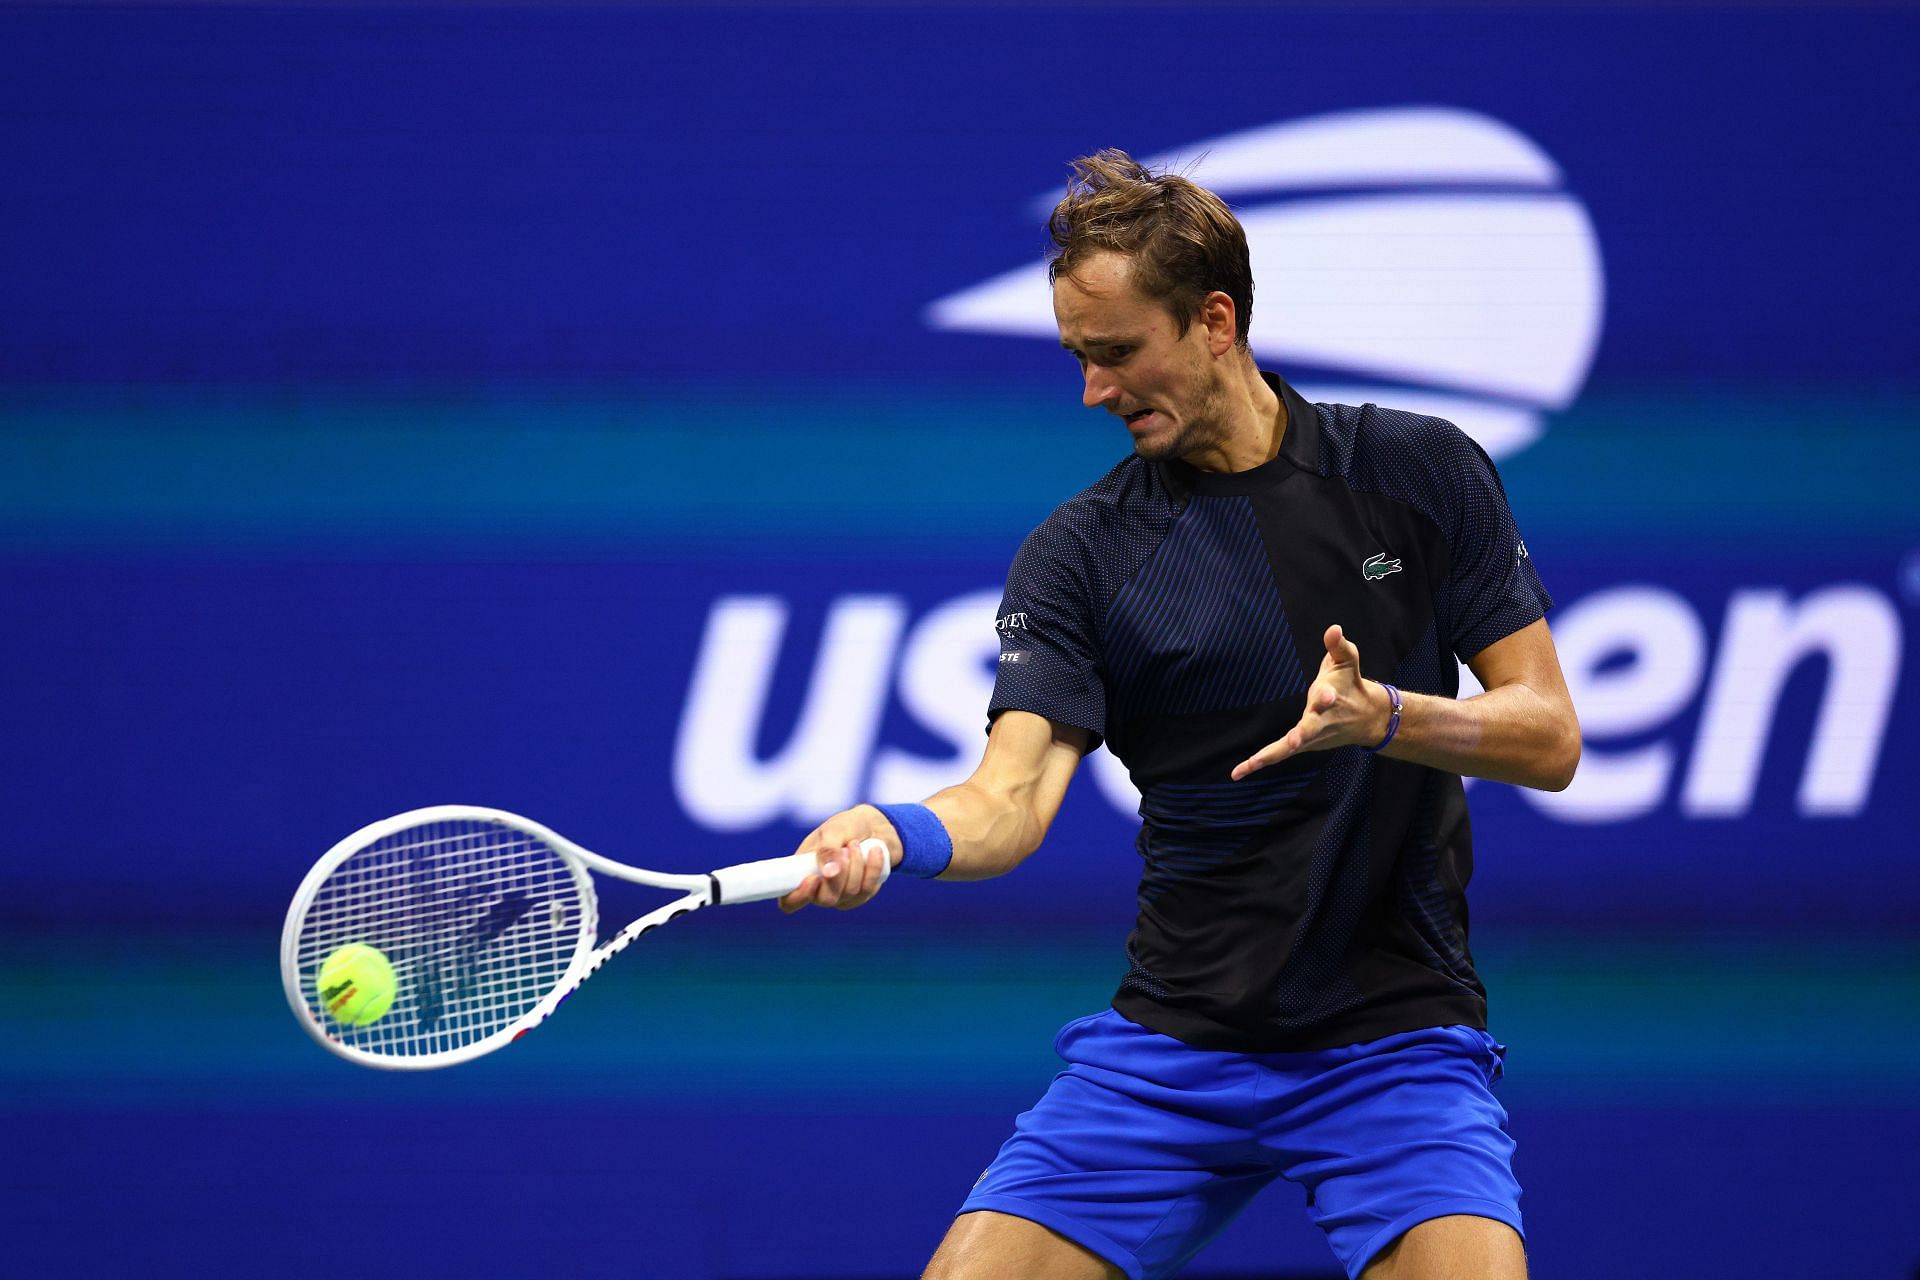 Daniil Medvedev in action at the US Open